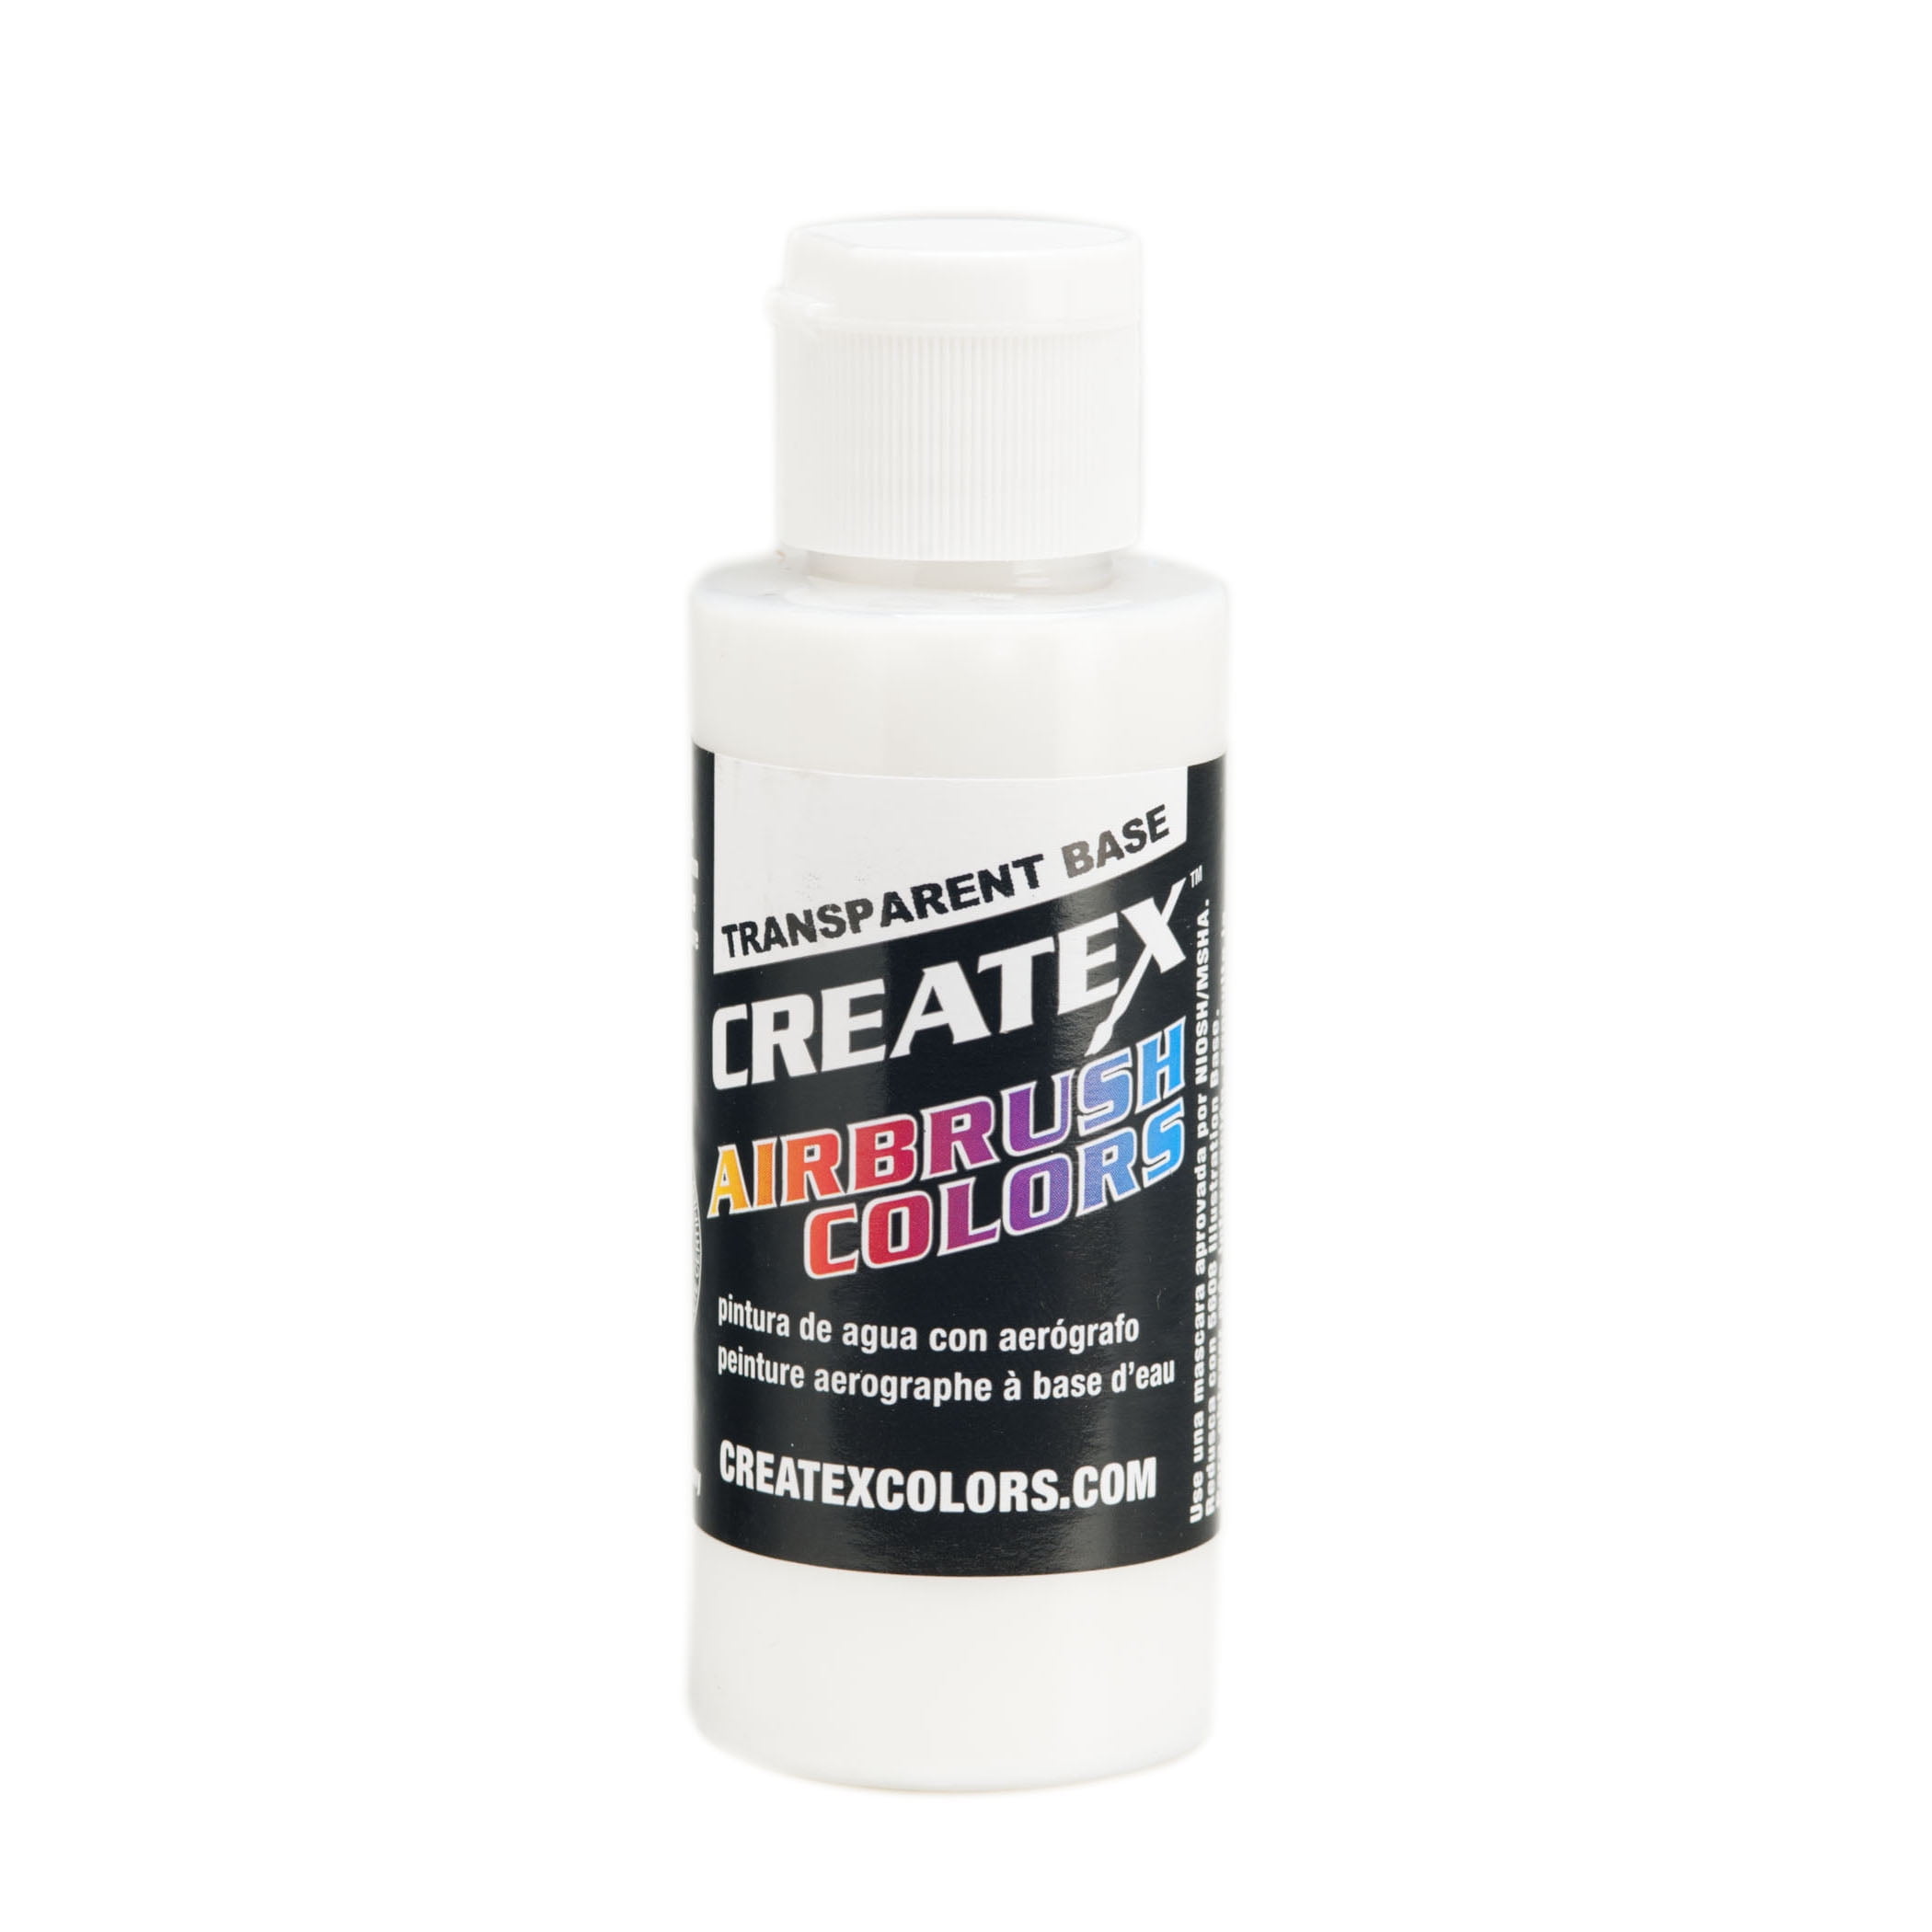 Airbrush Thinning Reducer and Extender Base, 1 Oz. Pint Bottle